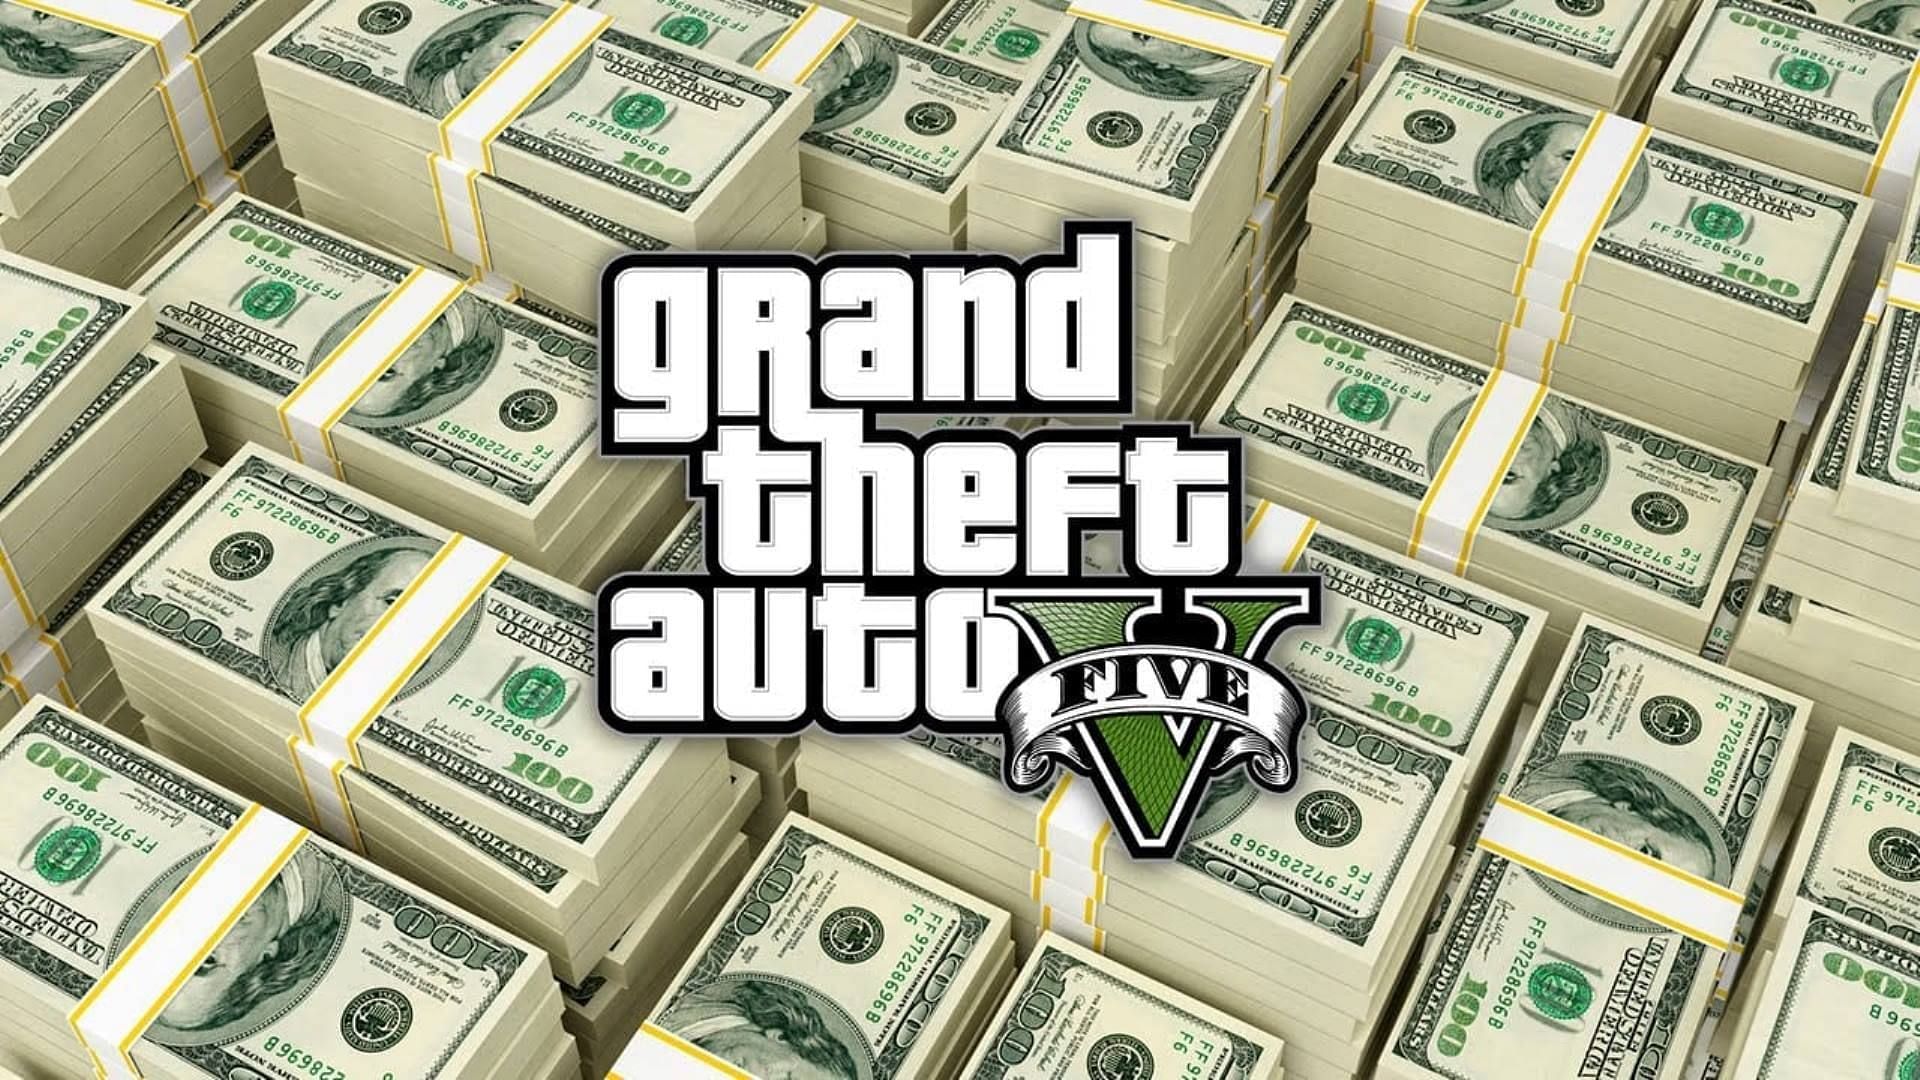 Rockstar Games earned thousands of million dollars in 10 years because of GTA 5 (Image via GameByte)